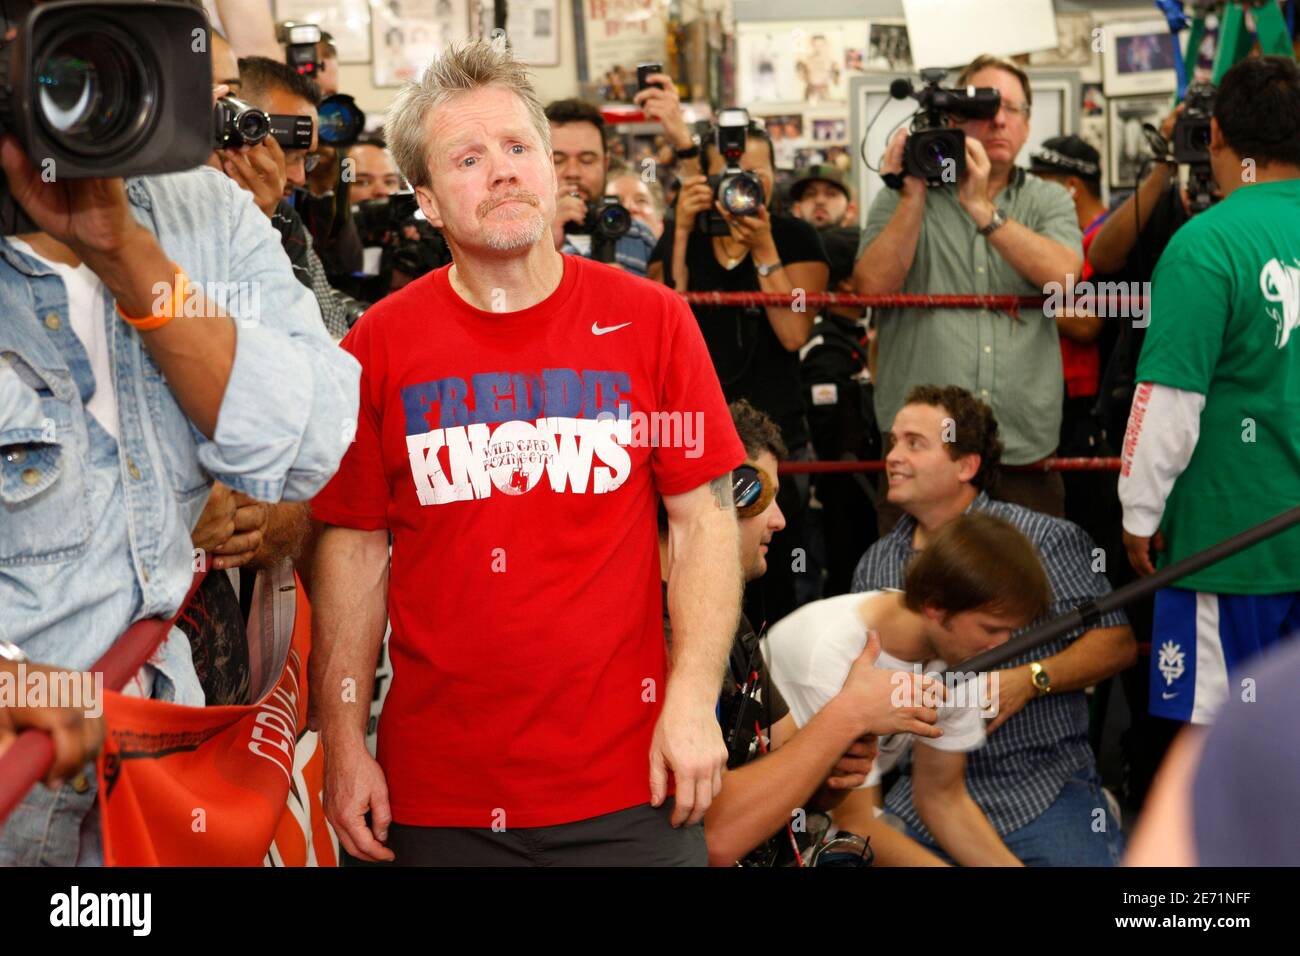 Head trainer Freddie Roach watches as Manny Pacquiao of the Philippines warms up for a workout at the Wild Card Boxing Club in Los Angeles, California, November 4, 2009. Pacquiao will challenge WBO welterweight champion Miguel Cotto of Puerto Rico for the title at the MGM Grand Garden Arena on November 14. REUTERS/Las Vegas Sun/Steve Marcus (UNITED STATES SPORT BOXING) Stock Photo